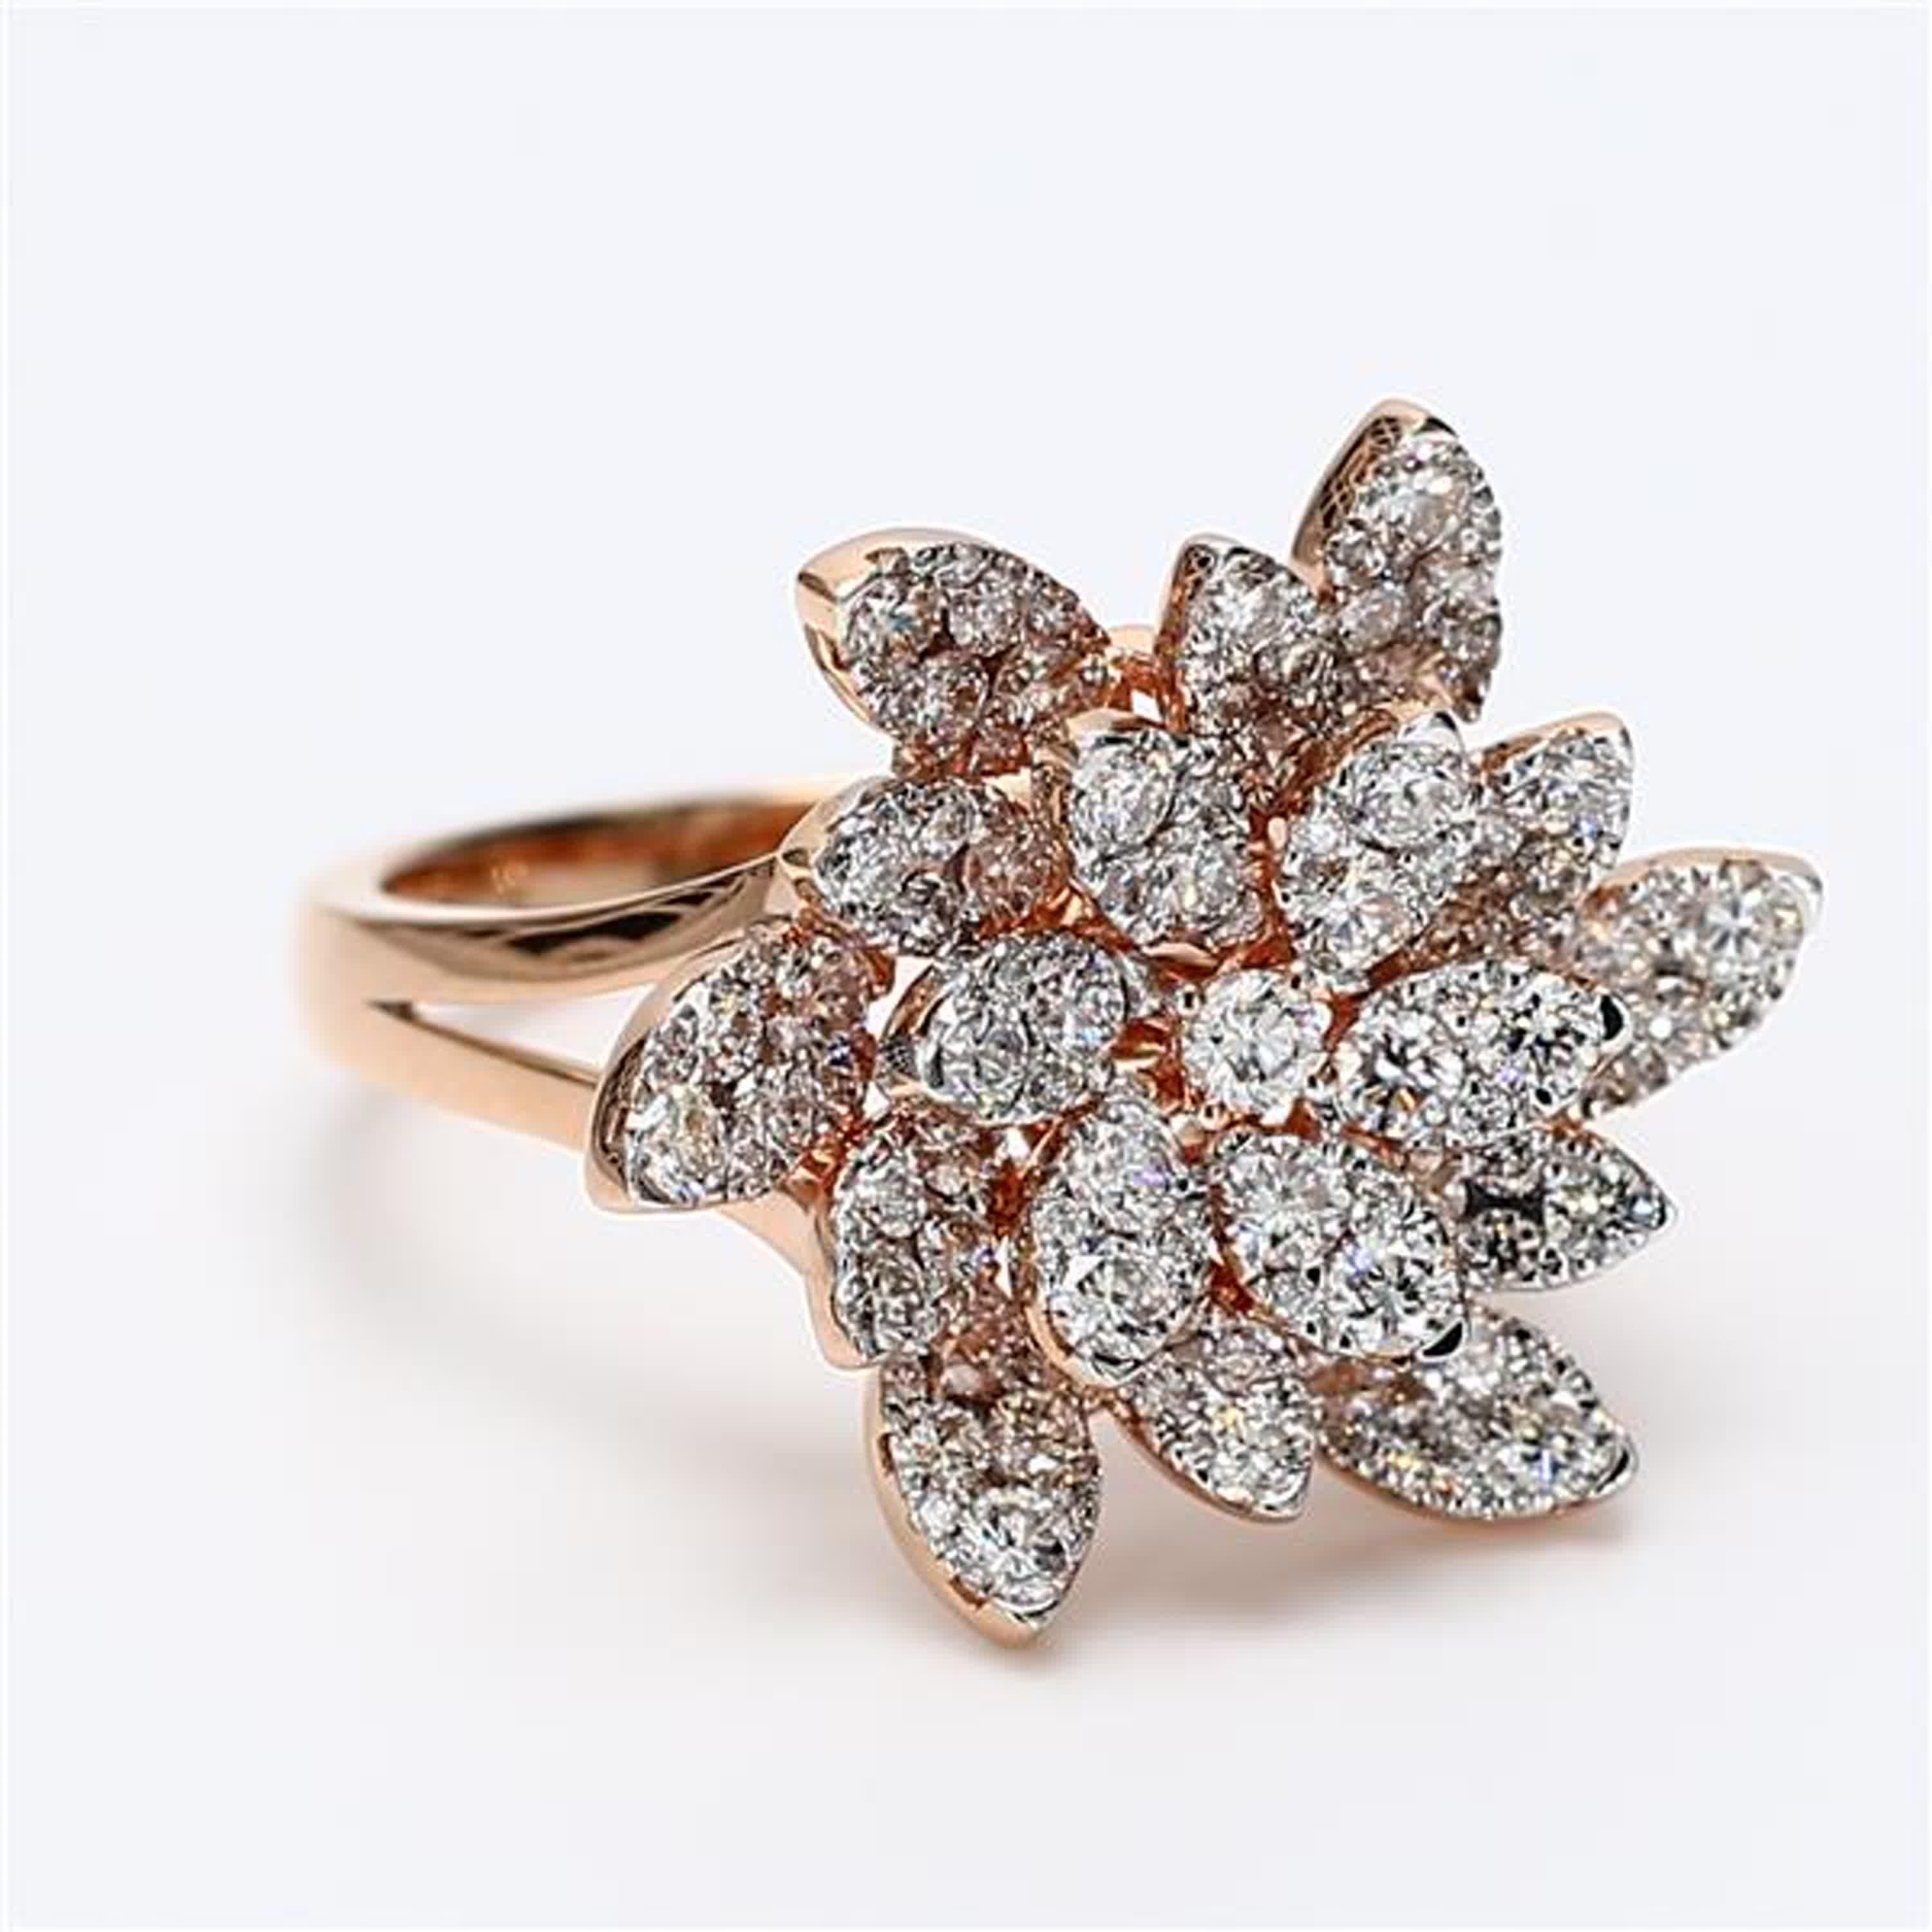 Natural White Round Diamond 1.36 Carat TW Rose Gold Cocktail Ring For Sale 1